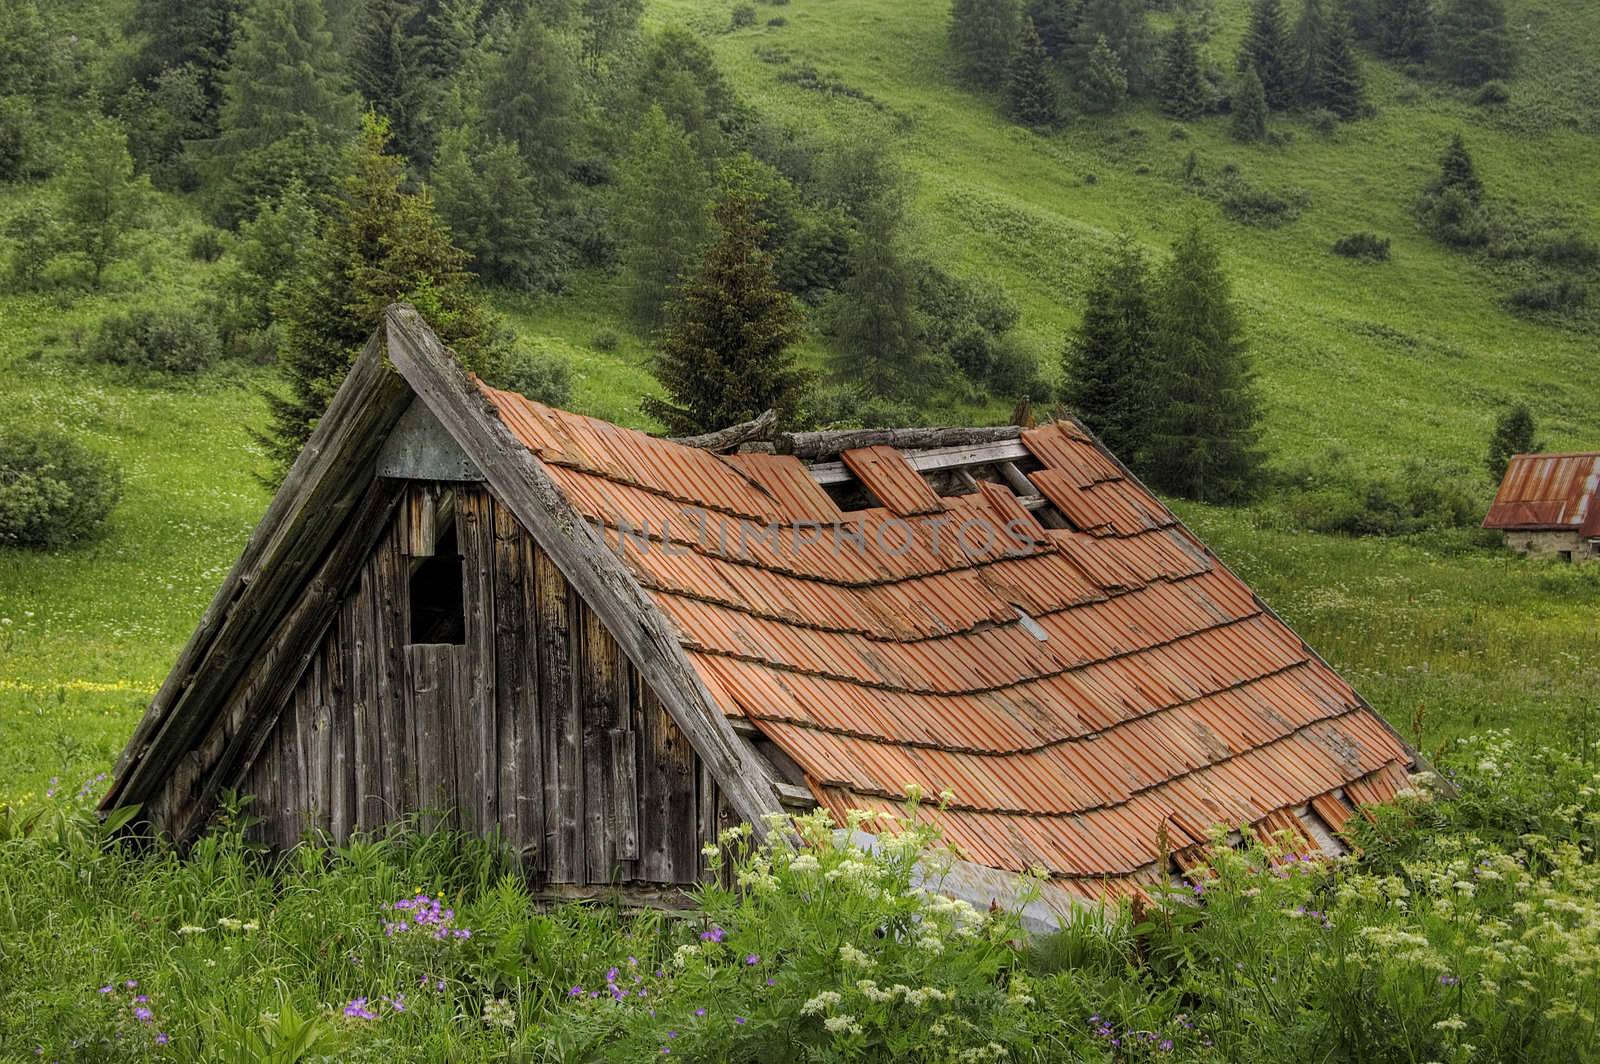 Old hut in the middle of an alpine meadow